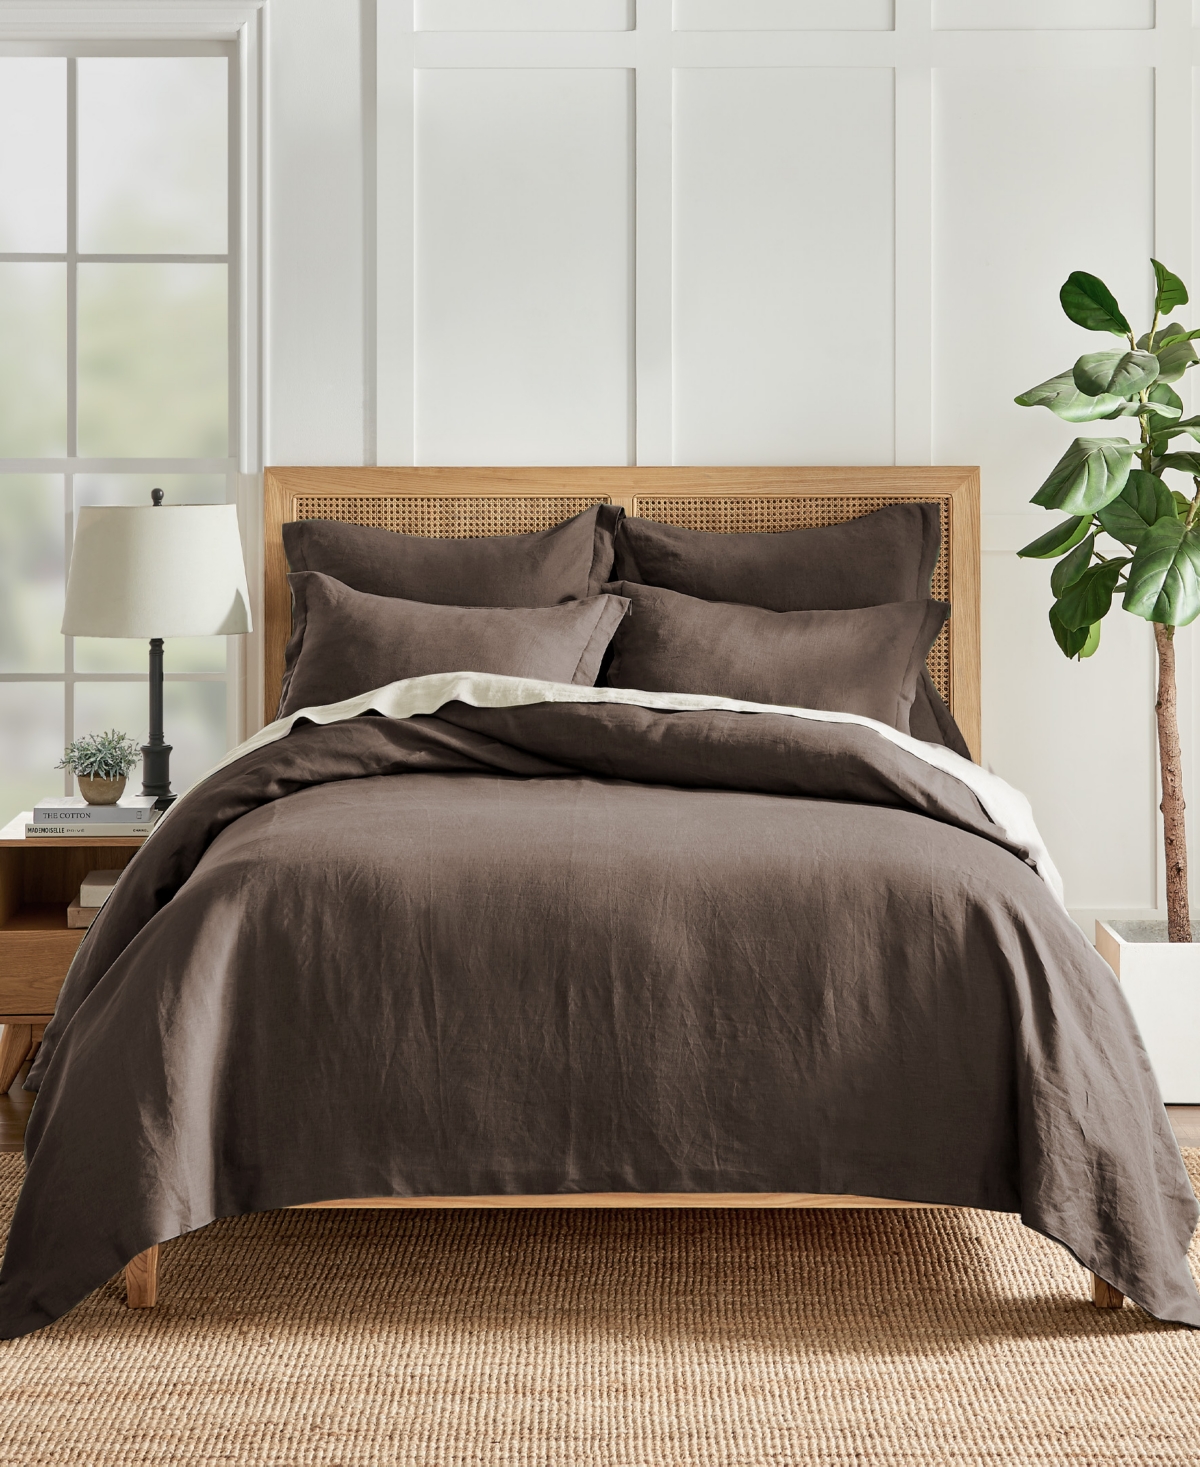 Levtex Washed Linen Solid Duvet Cover, Twin/twin Xl In Brown